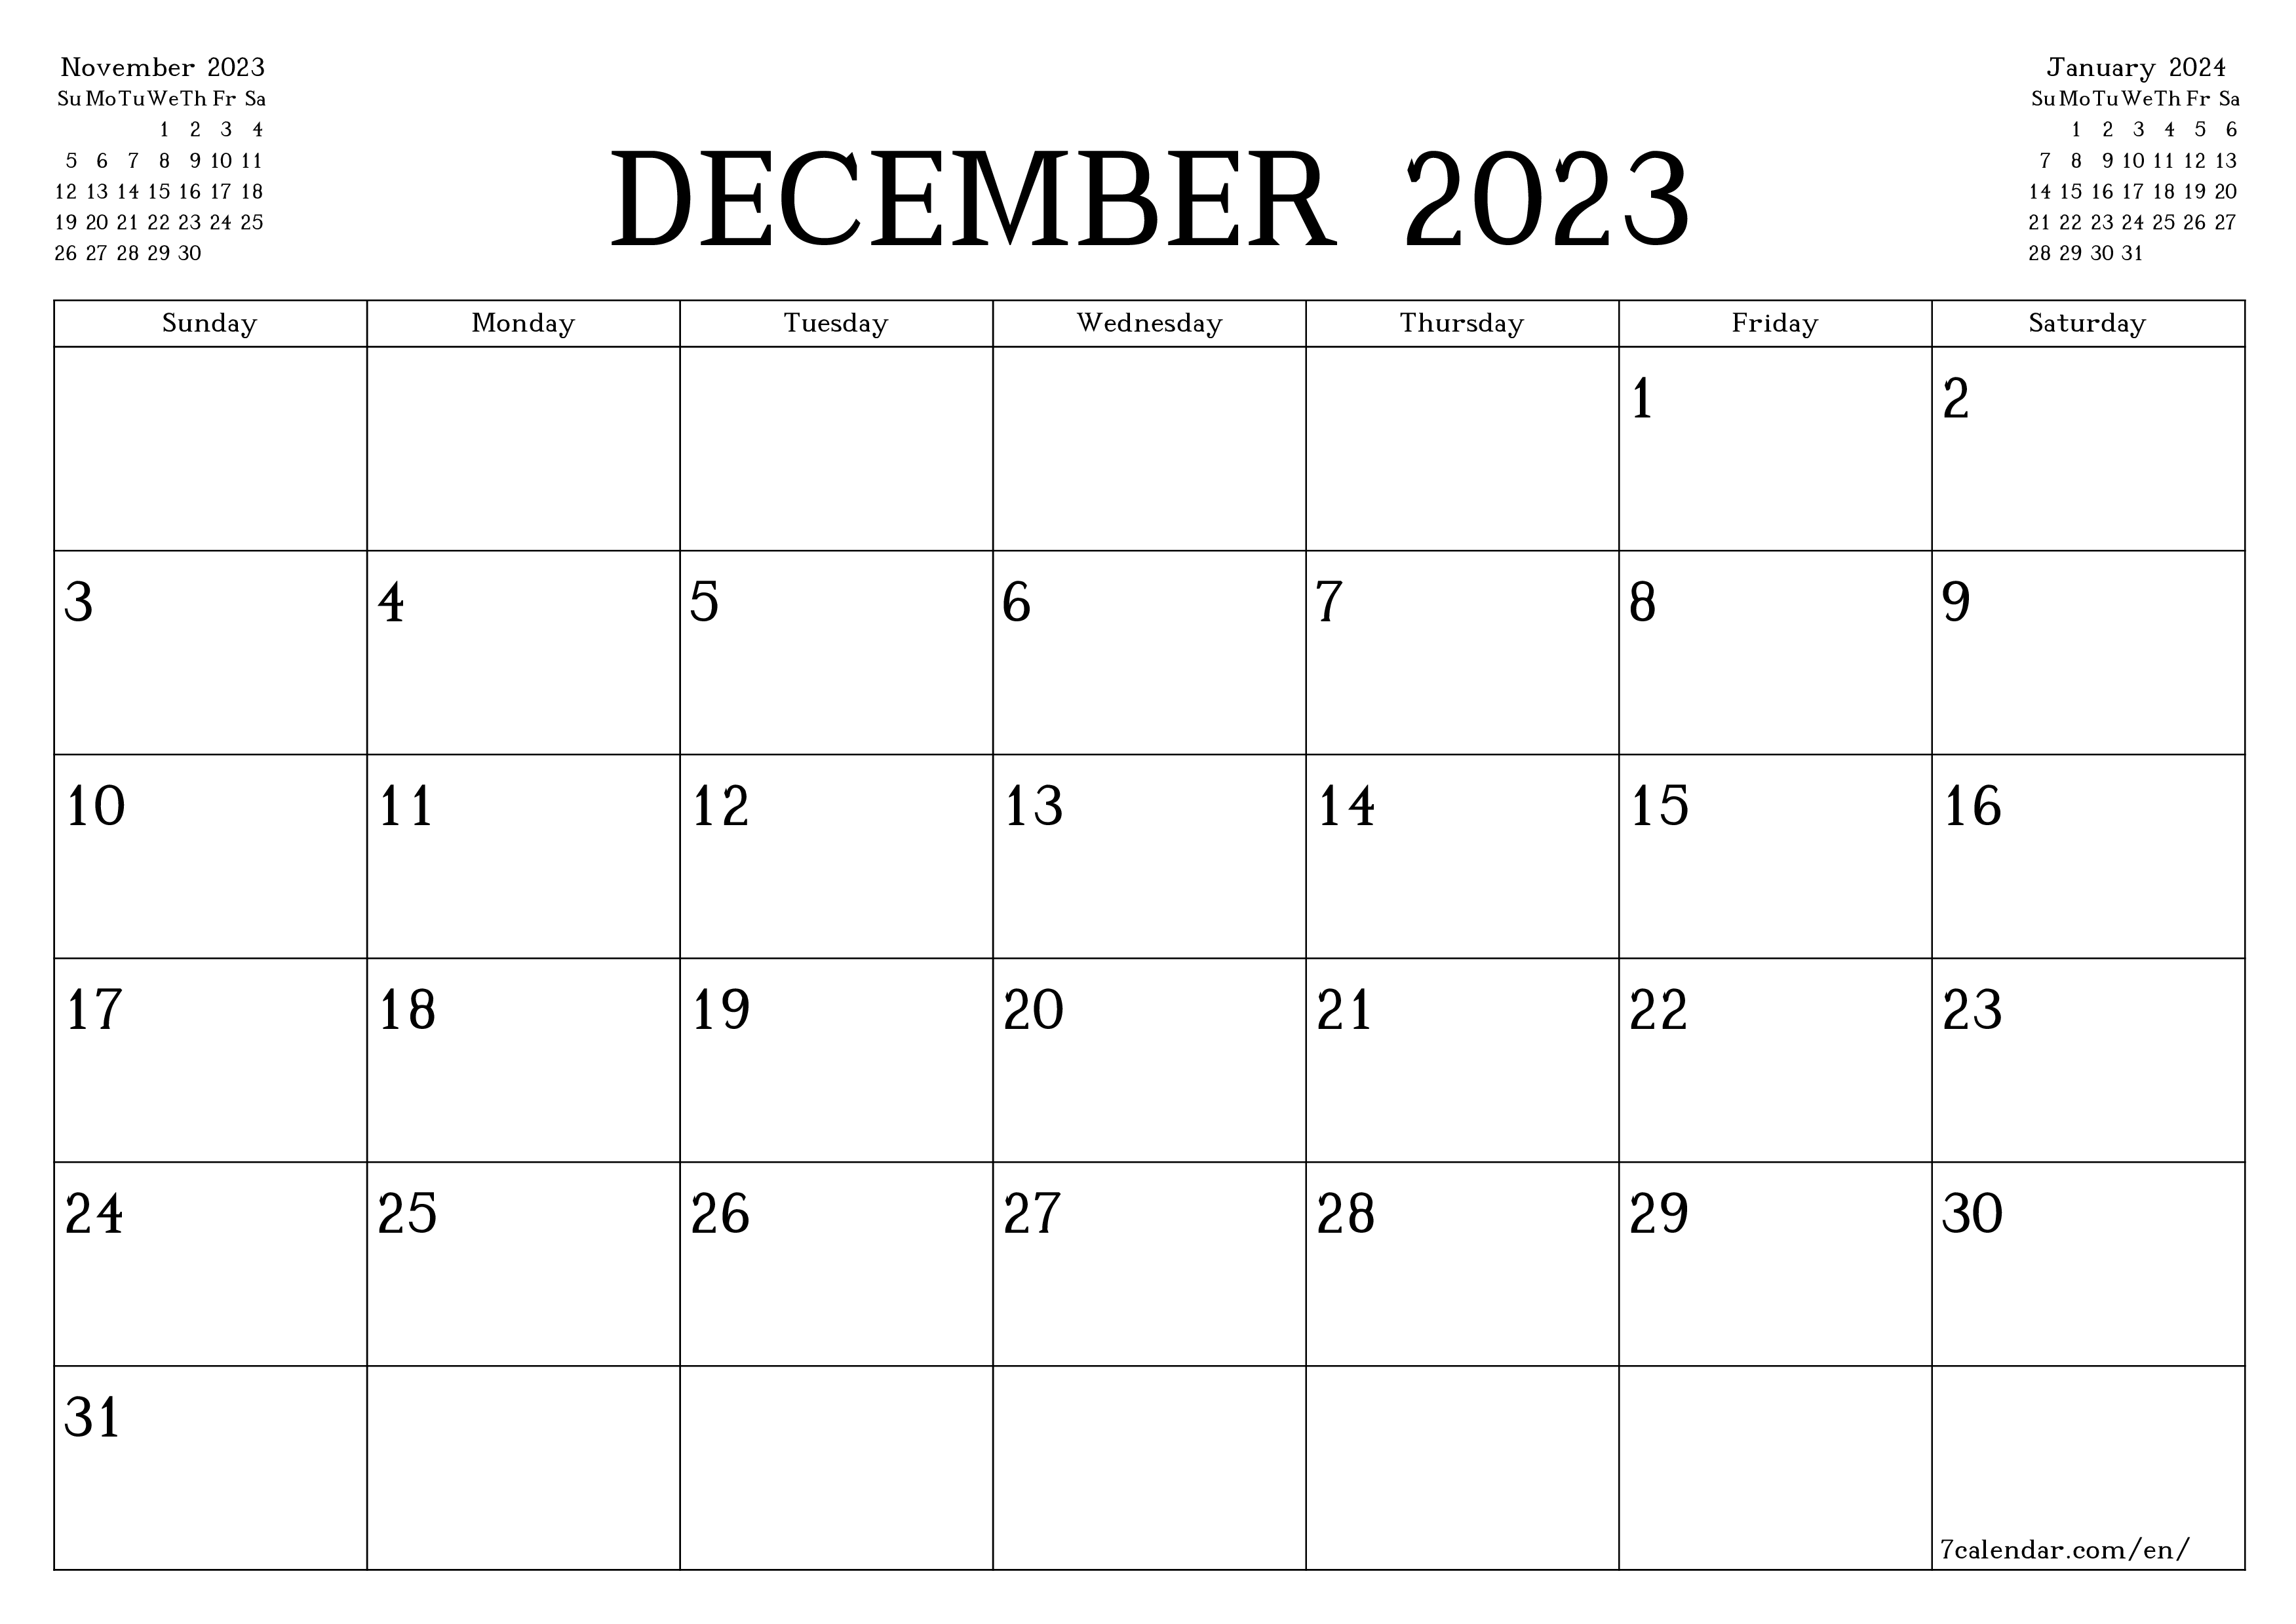 Blank monthly calendar planner for month December 2023 with notes save and print to PDF PNG English - 7calendar.com